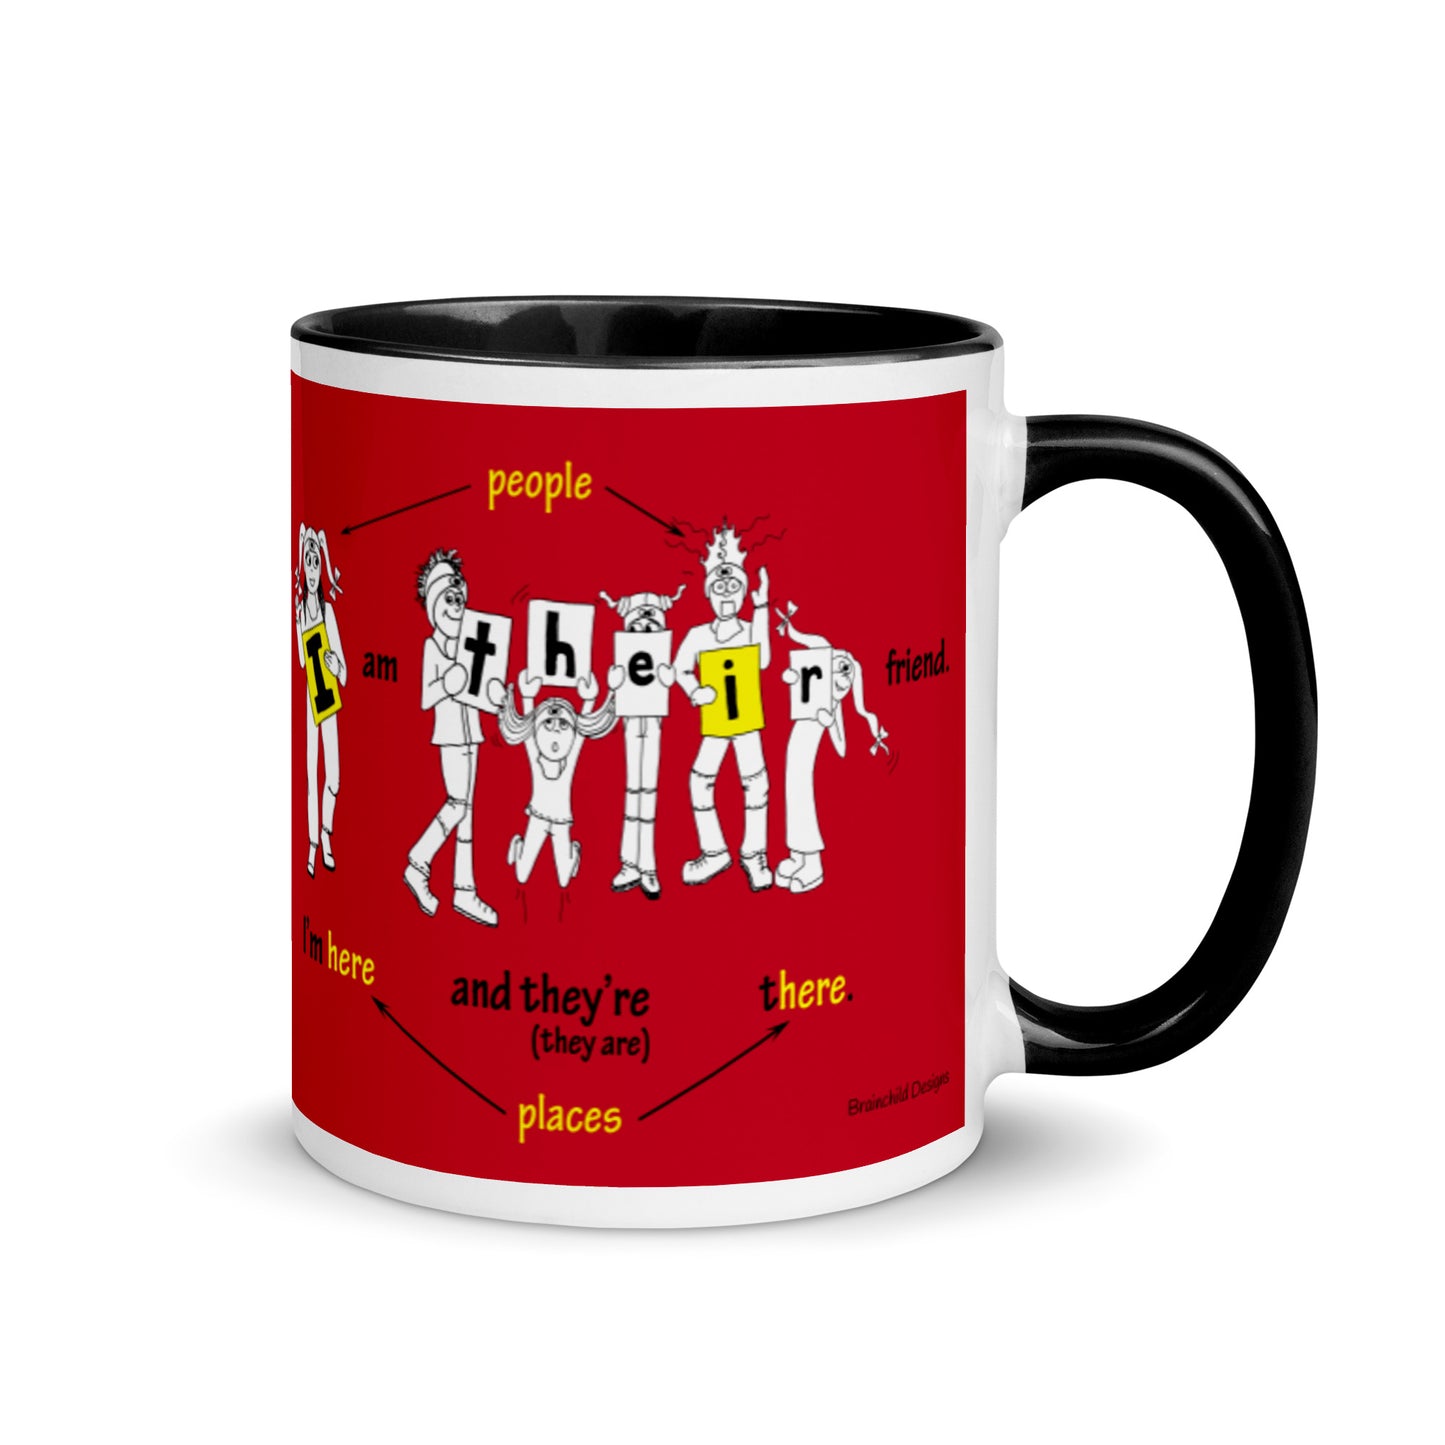 Their there and they're mug - Brainchild Designs